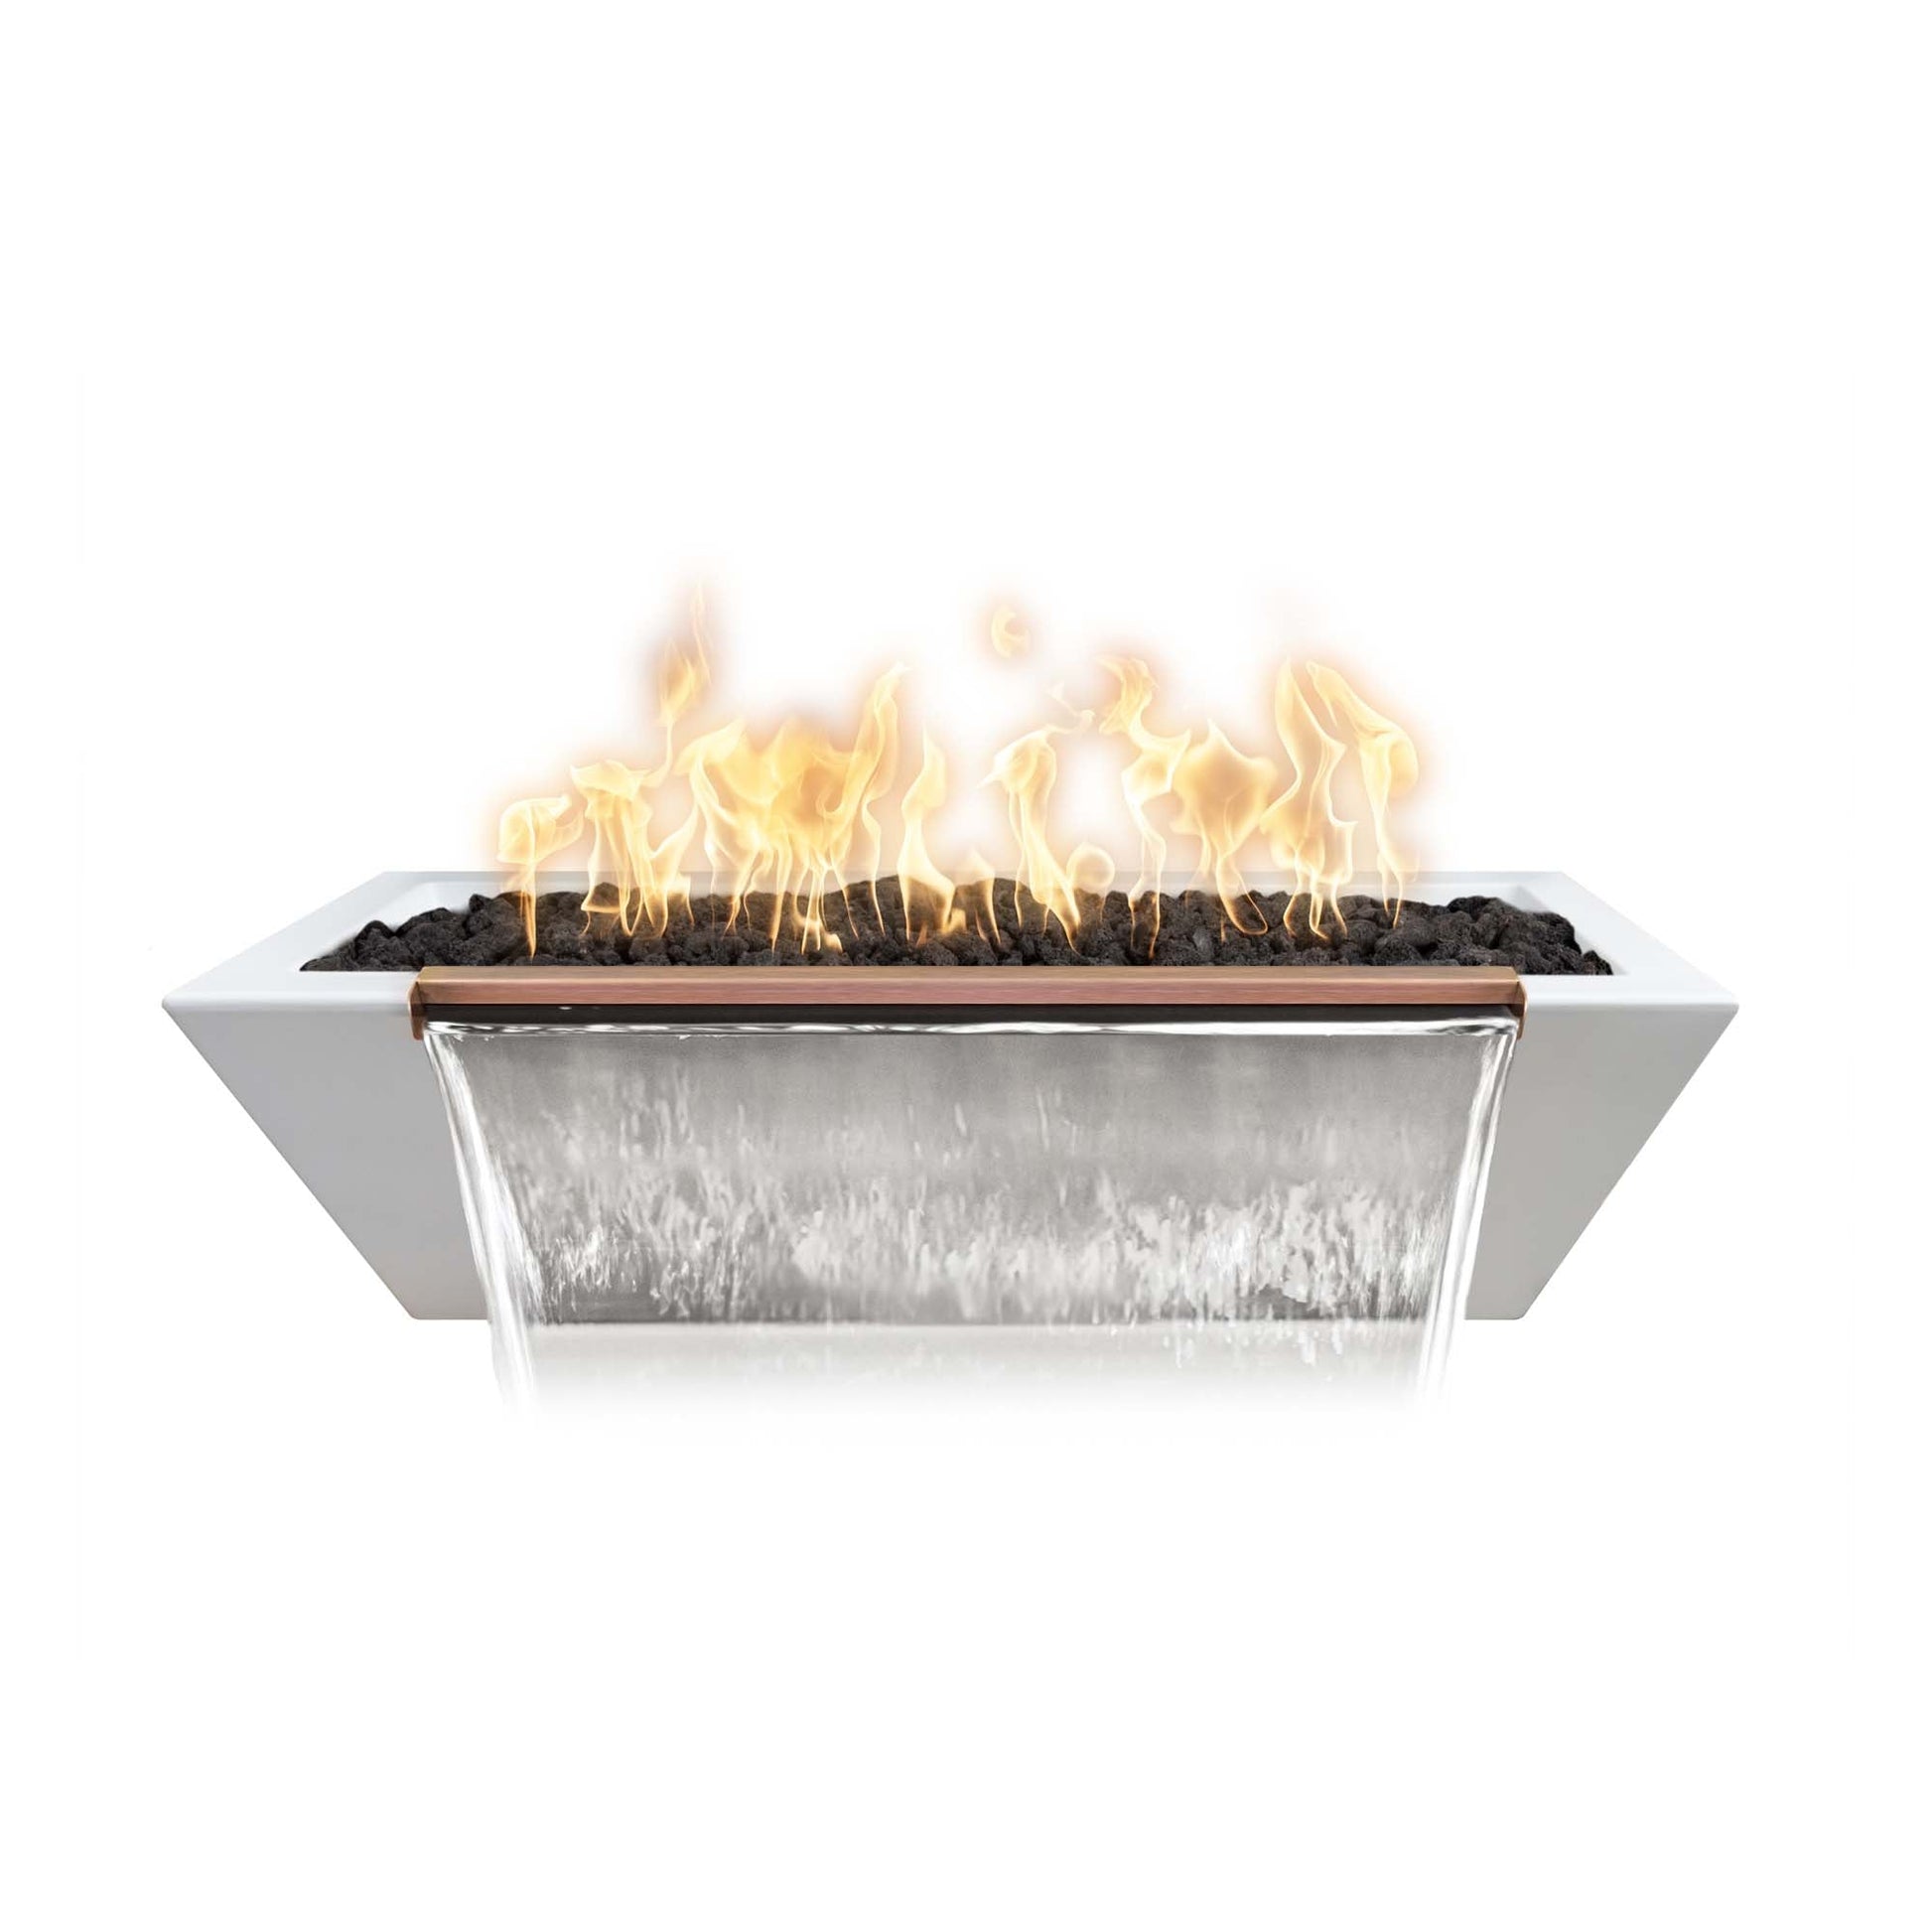 The Outdoor Plus Linear Maya 72" Rustic White GFRC Concrete Natural Gas Fire & Water Bowl with Match Lit with Flame Sense Ignition